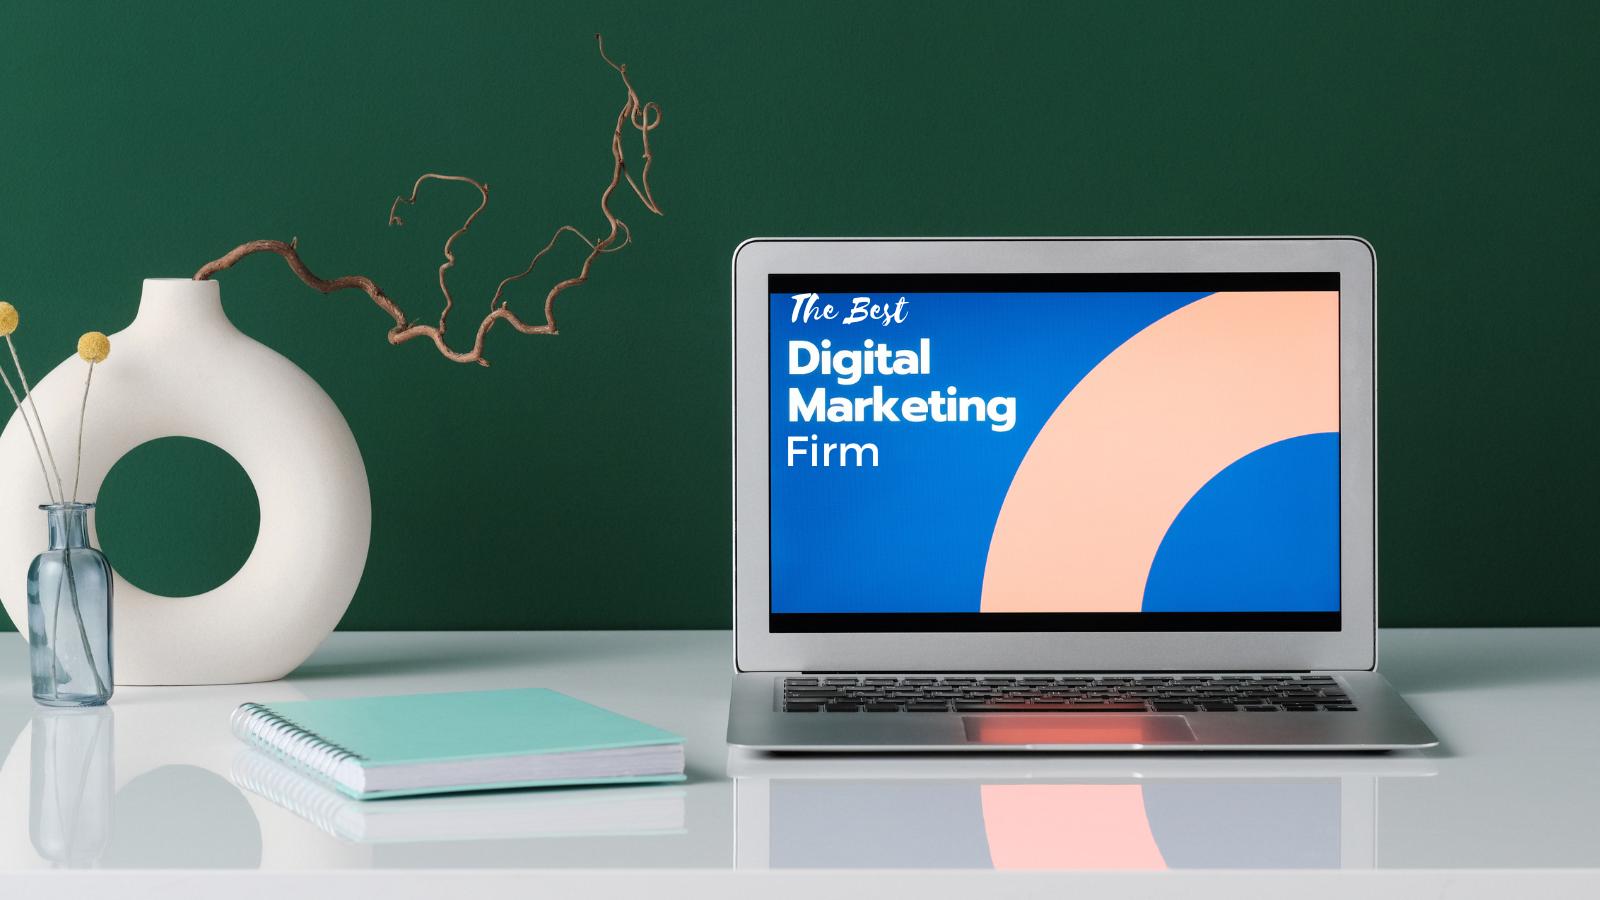 Better Tips and Tricks for Growing Your Digital Marketing Firm